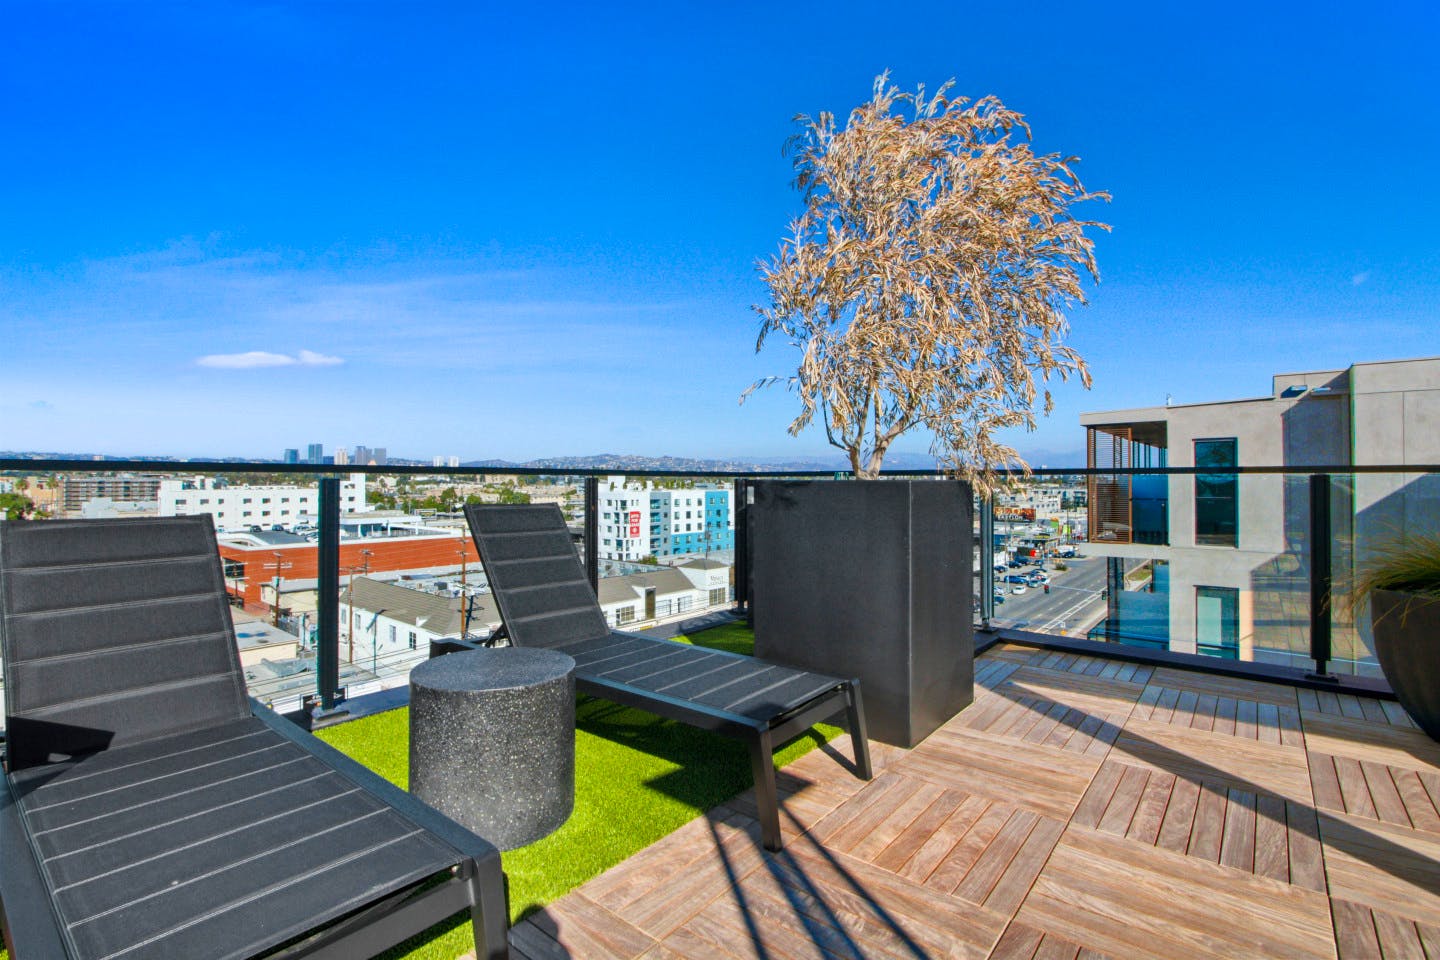 New Stylish complex minutes away from the beach and Downtown LA